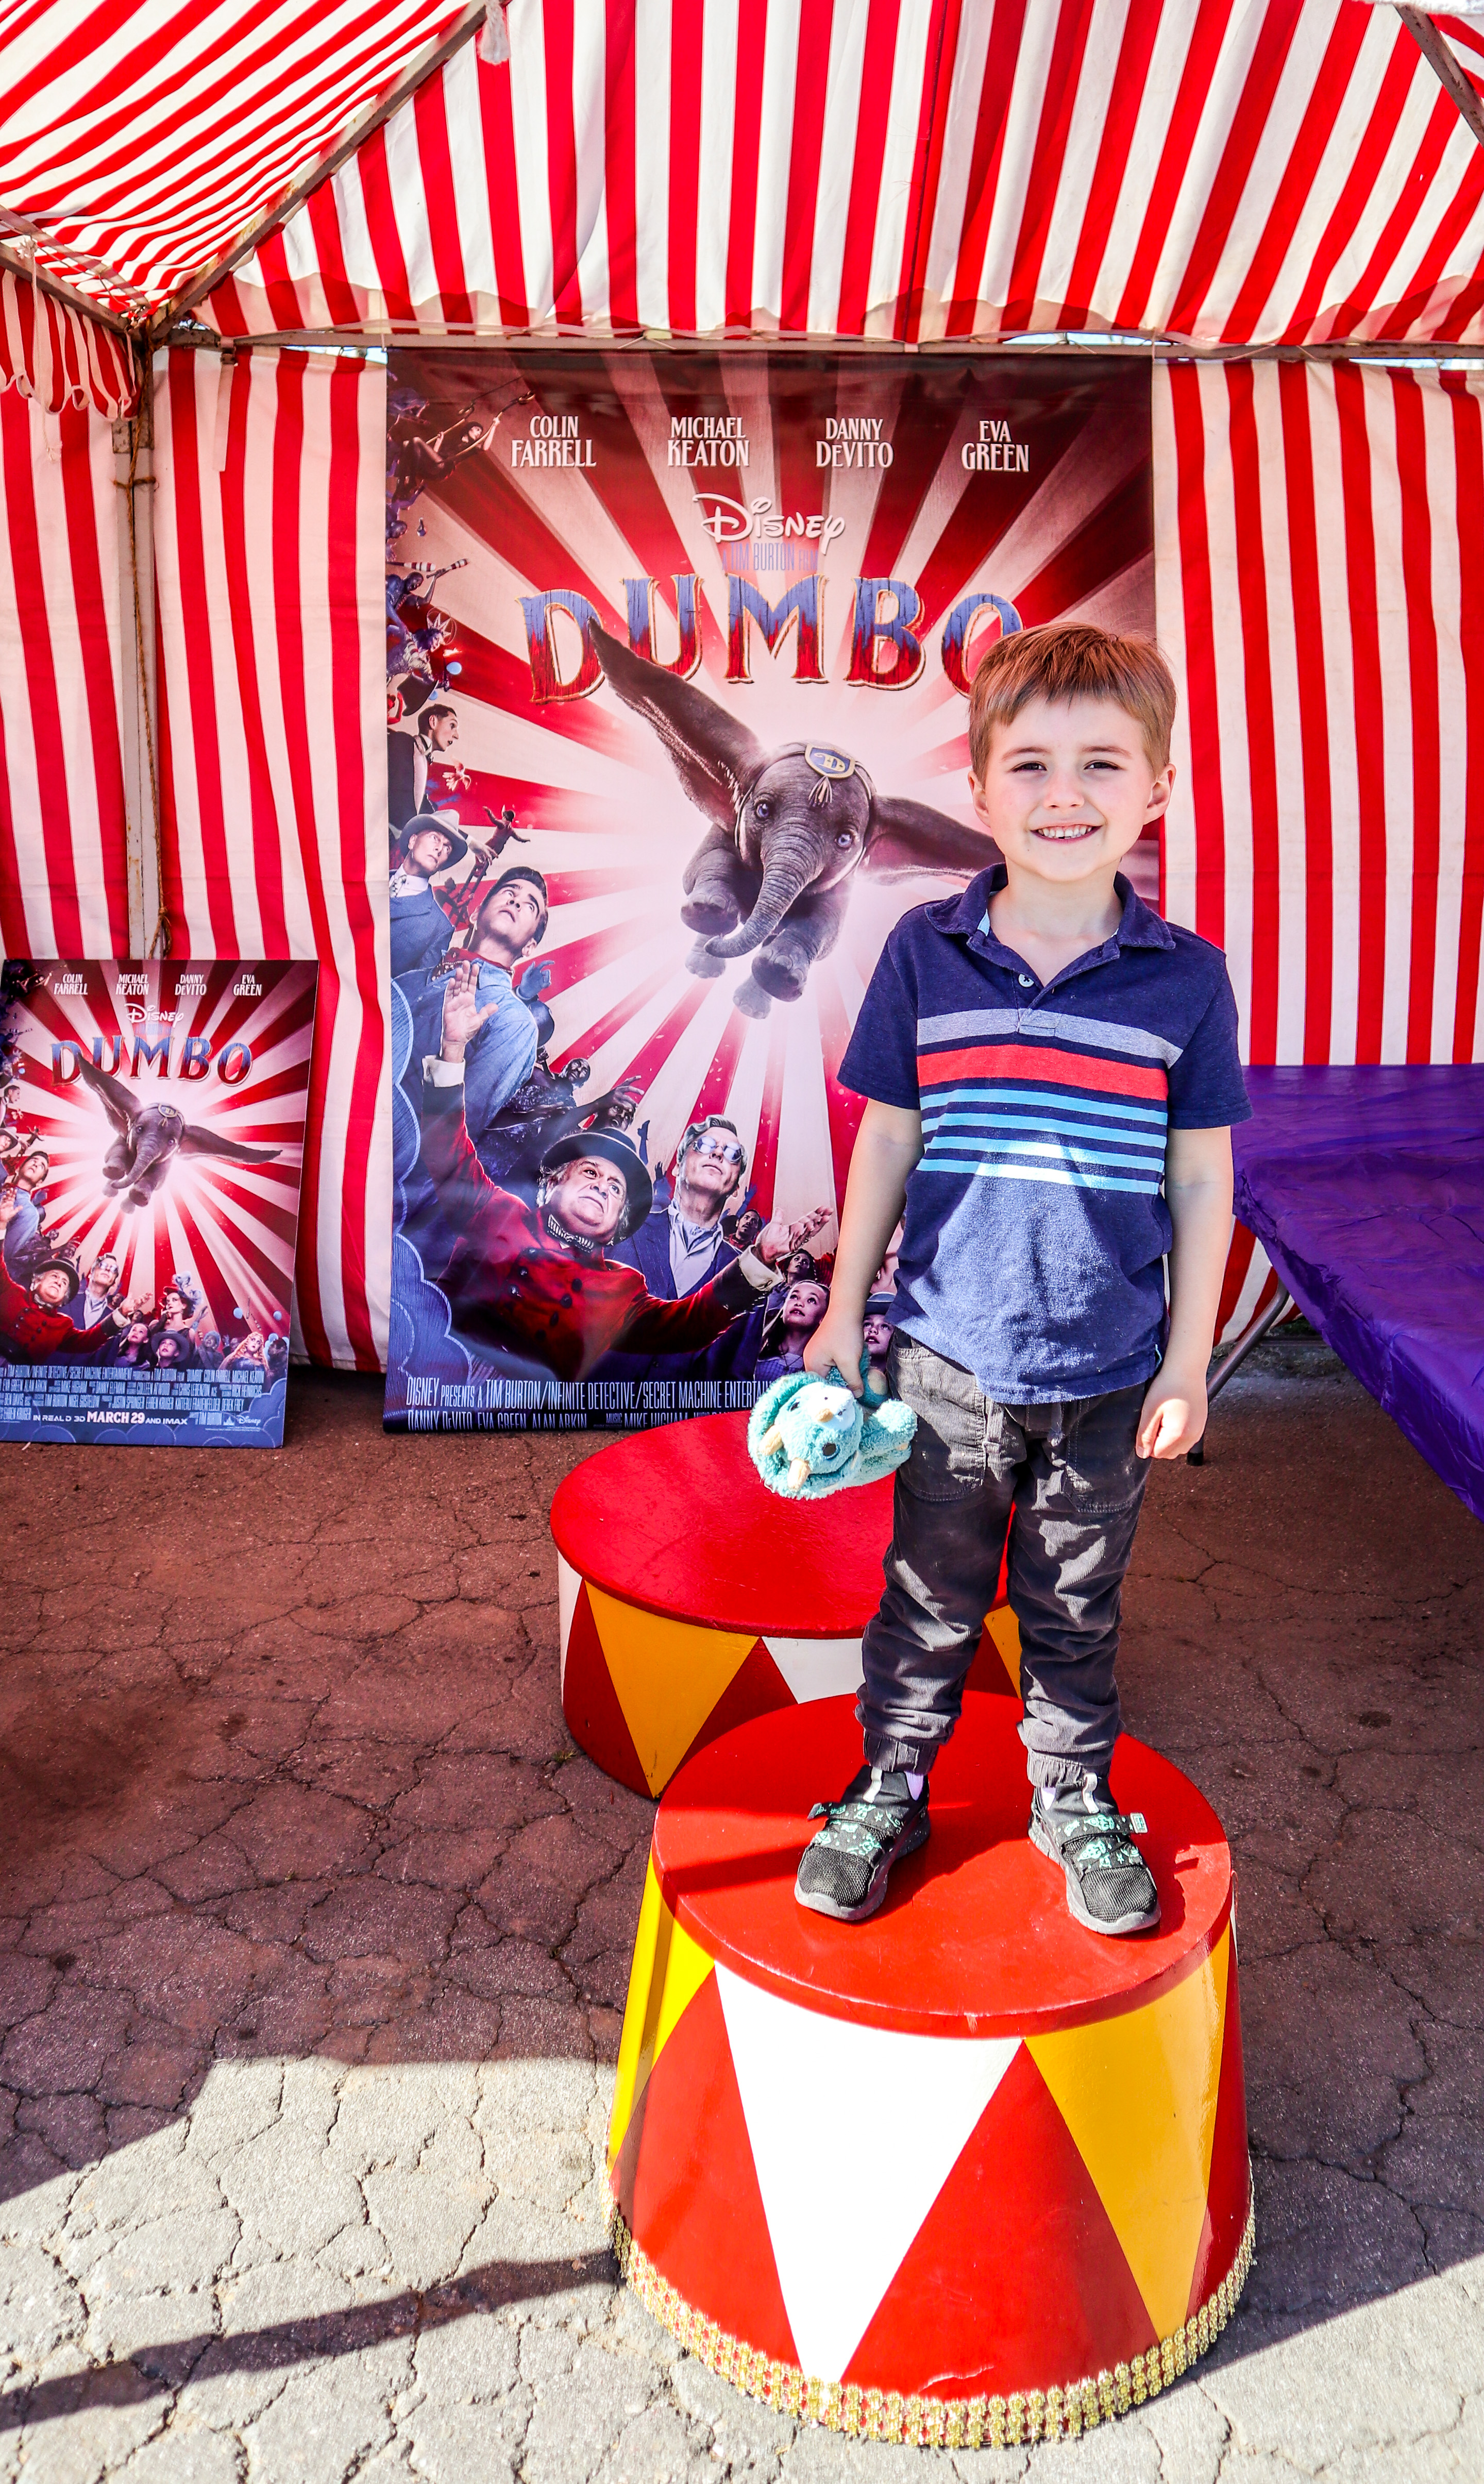 A boy smiles in front of a Disney Dumbo poster at the Dumbo promotional booth at STEA2M Fair